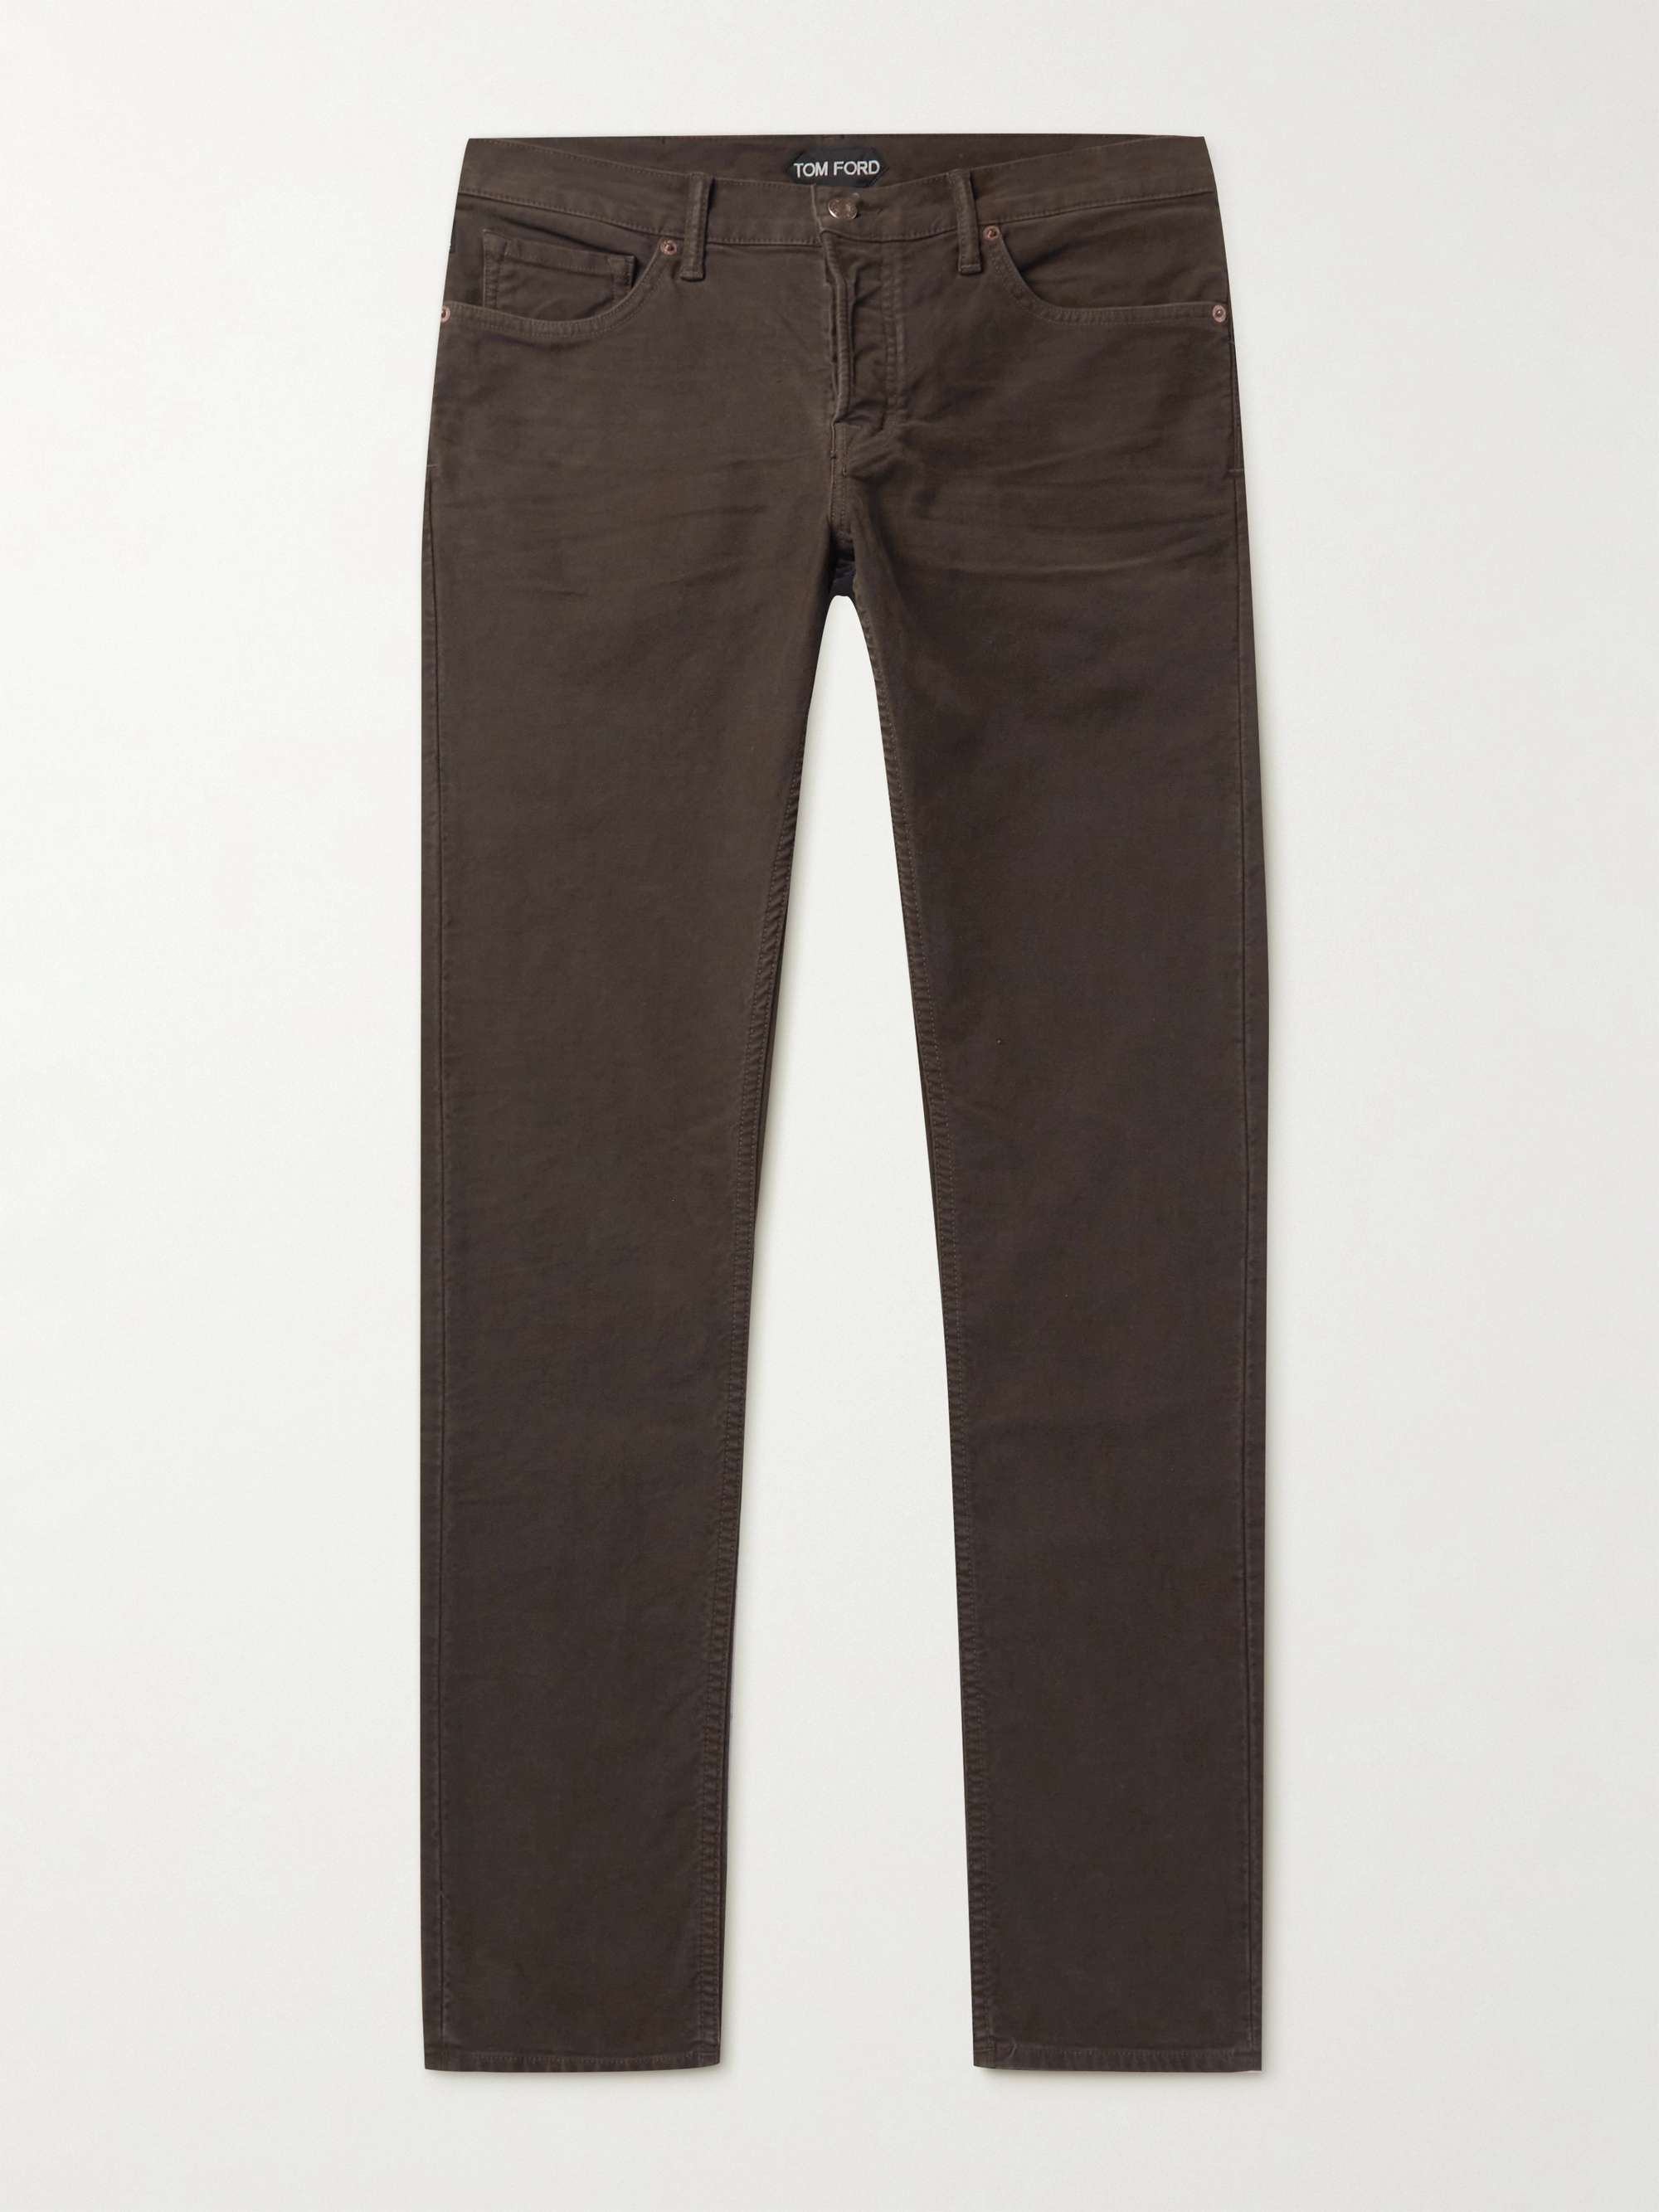 TOM FORD Slim-Fit Garment-Dyed Stretch-Cotton Moleskin Trousers